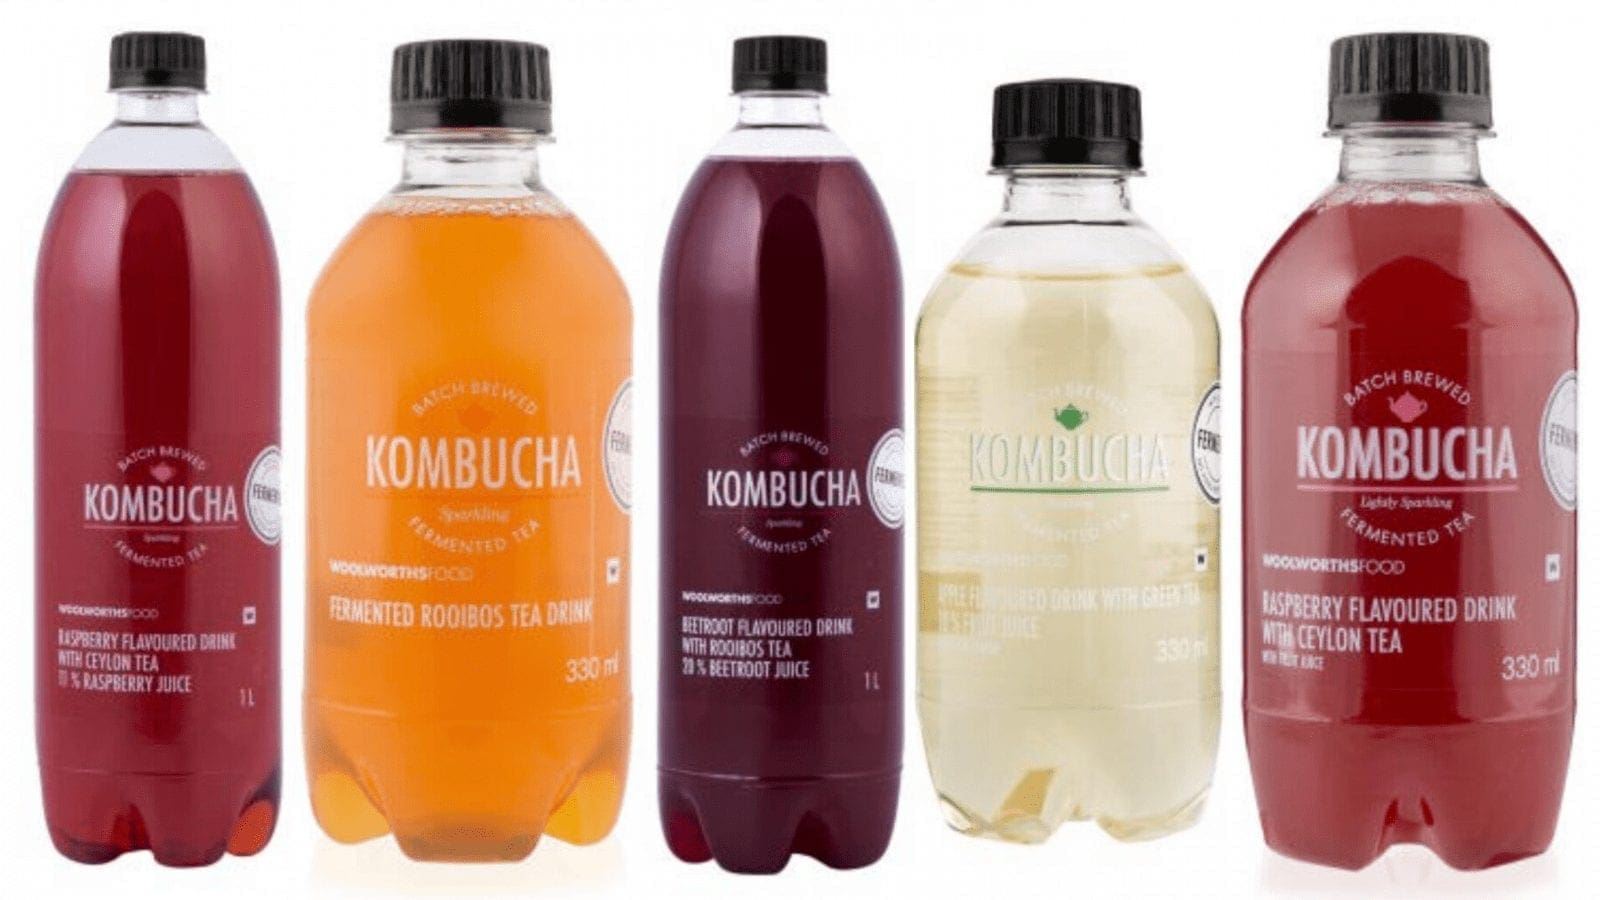 South Africa’s In2food launches wide range of fermented tea drinks